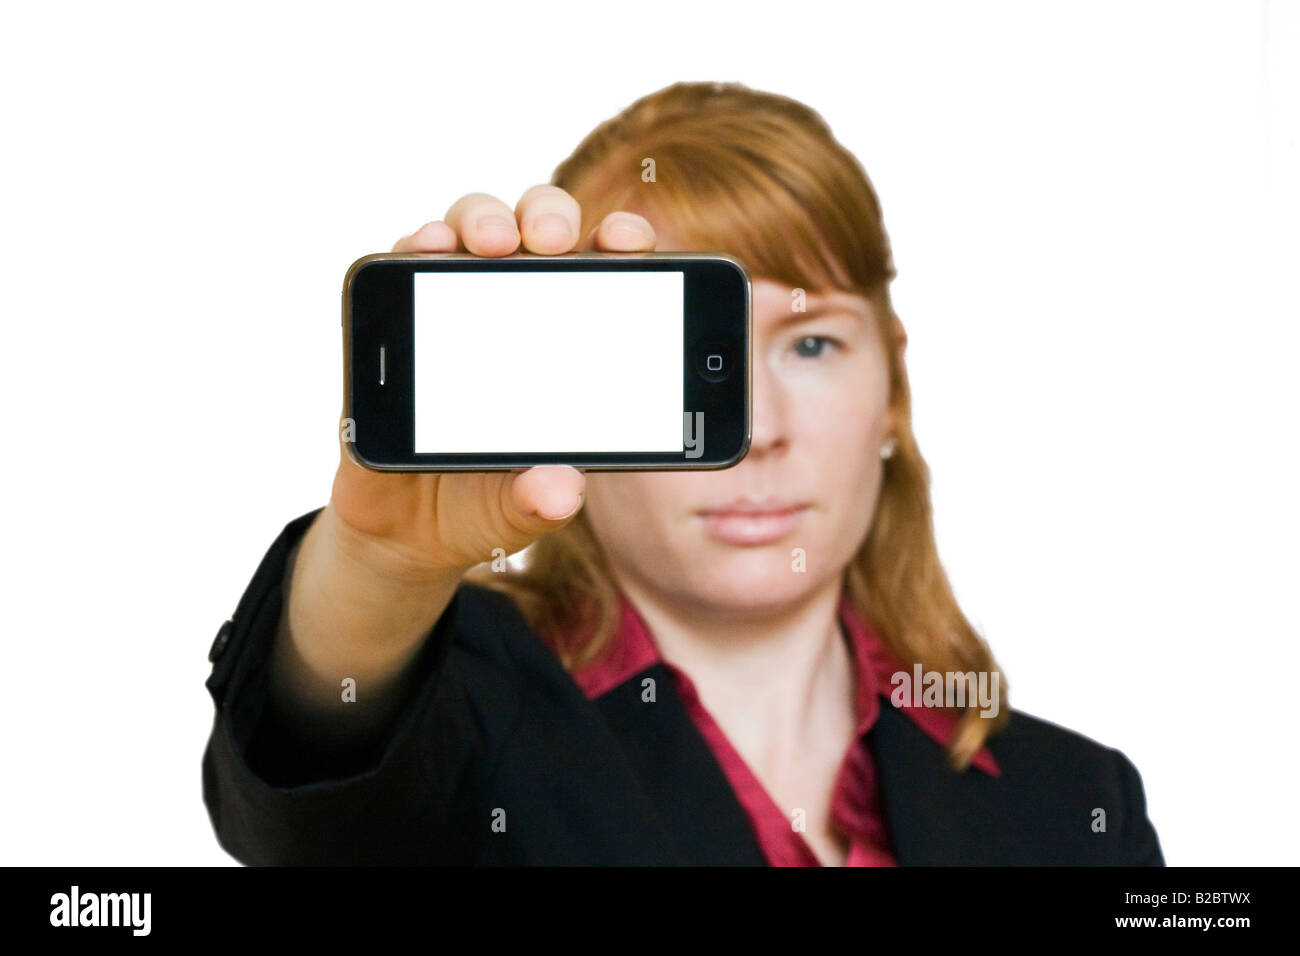 A female model holds up a new Apple 3G iPhone with a blank screen Stock Photo